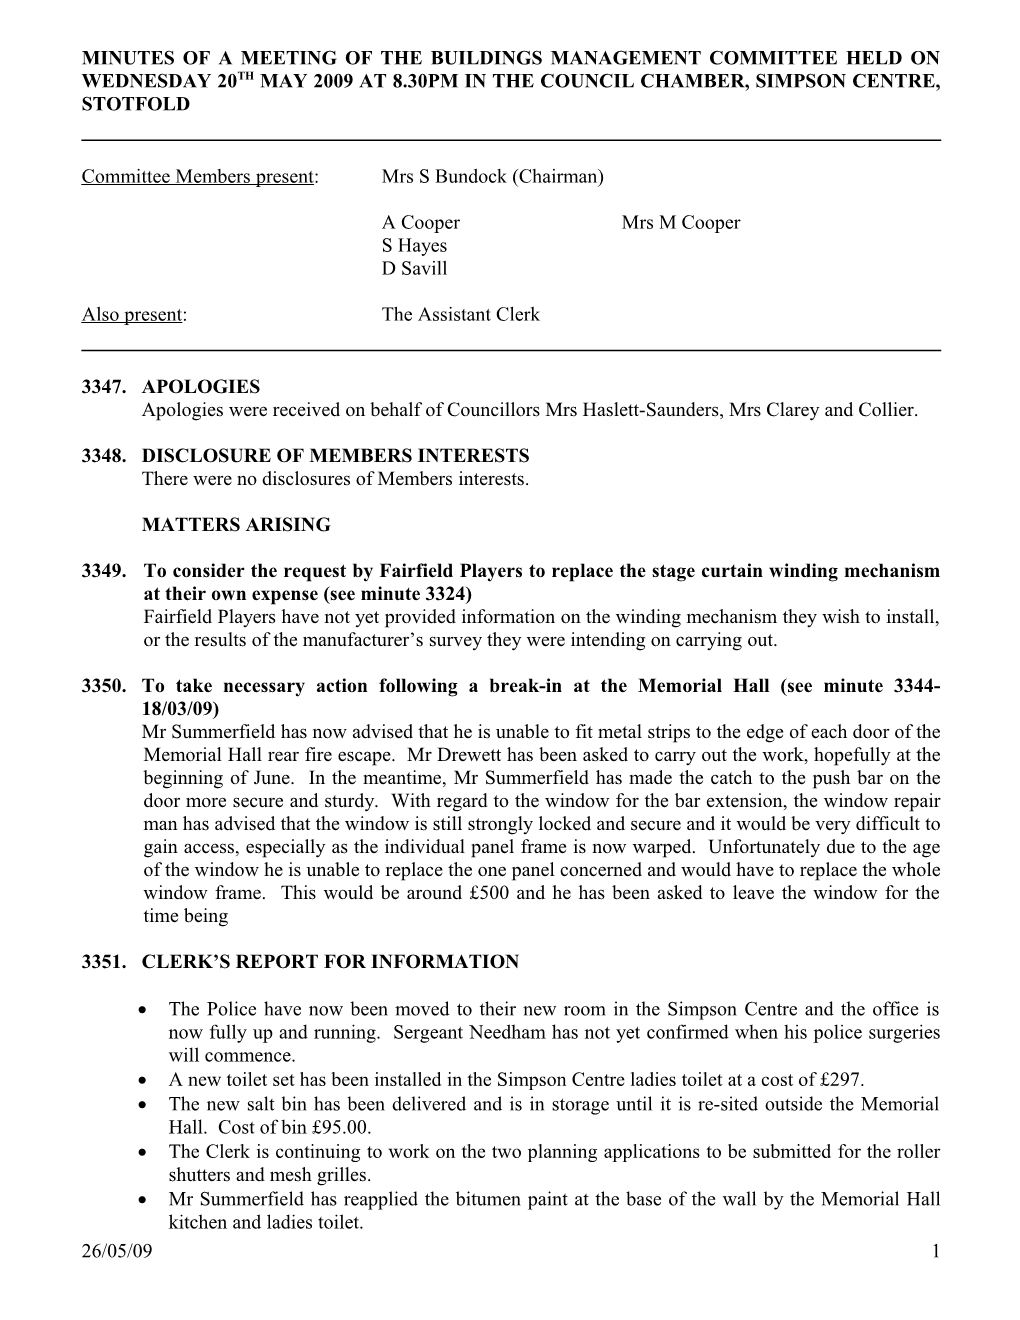 Minutes of a Meeting of the Buildings Management Committee Held on Wednesday 18Th March